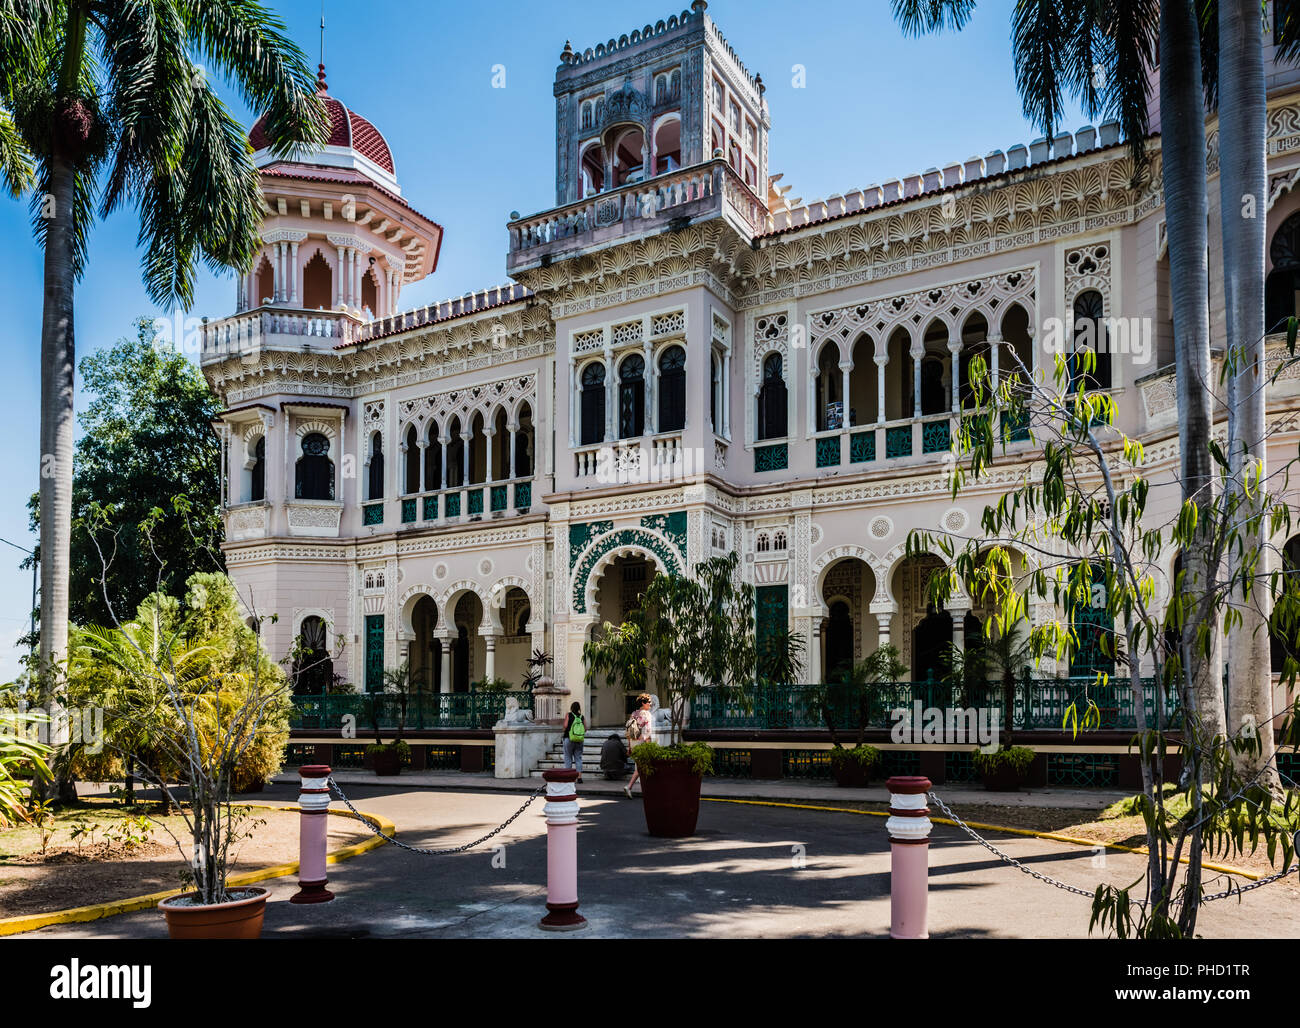 Palacio de Valle is an ornate palace built in 1917 with the intention of making it a casino. It now houses an upscale restaurant and terrace bar Stock Photo